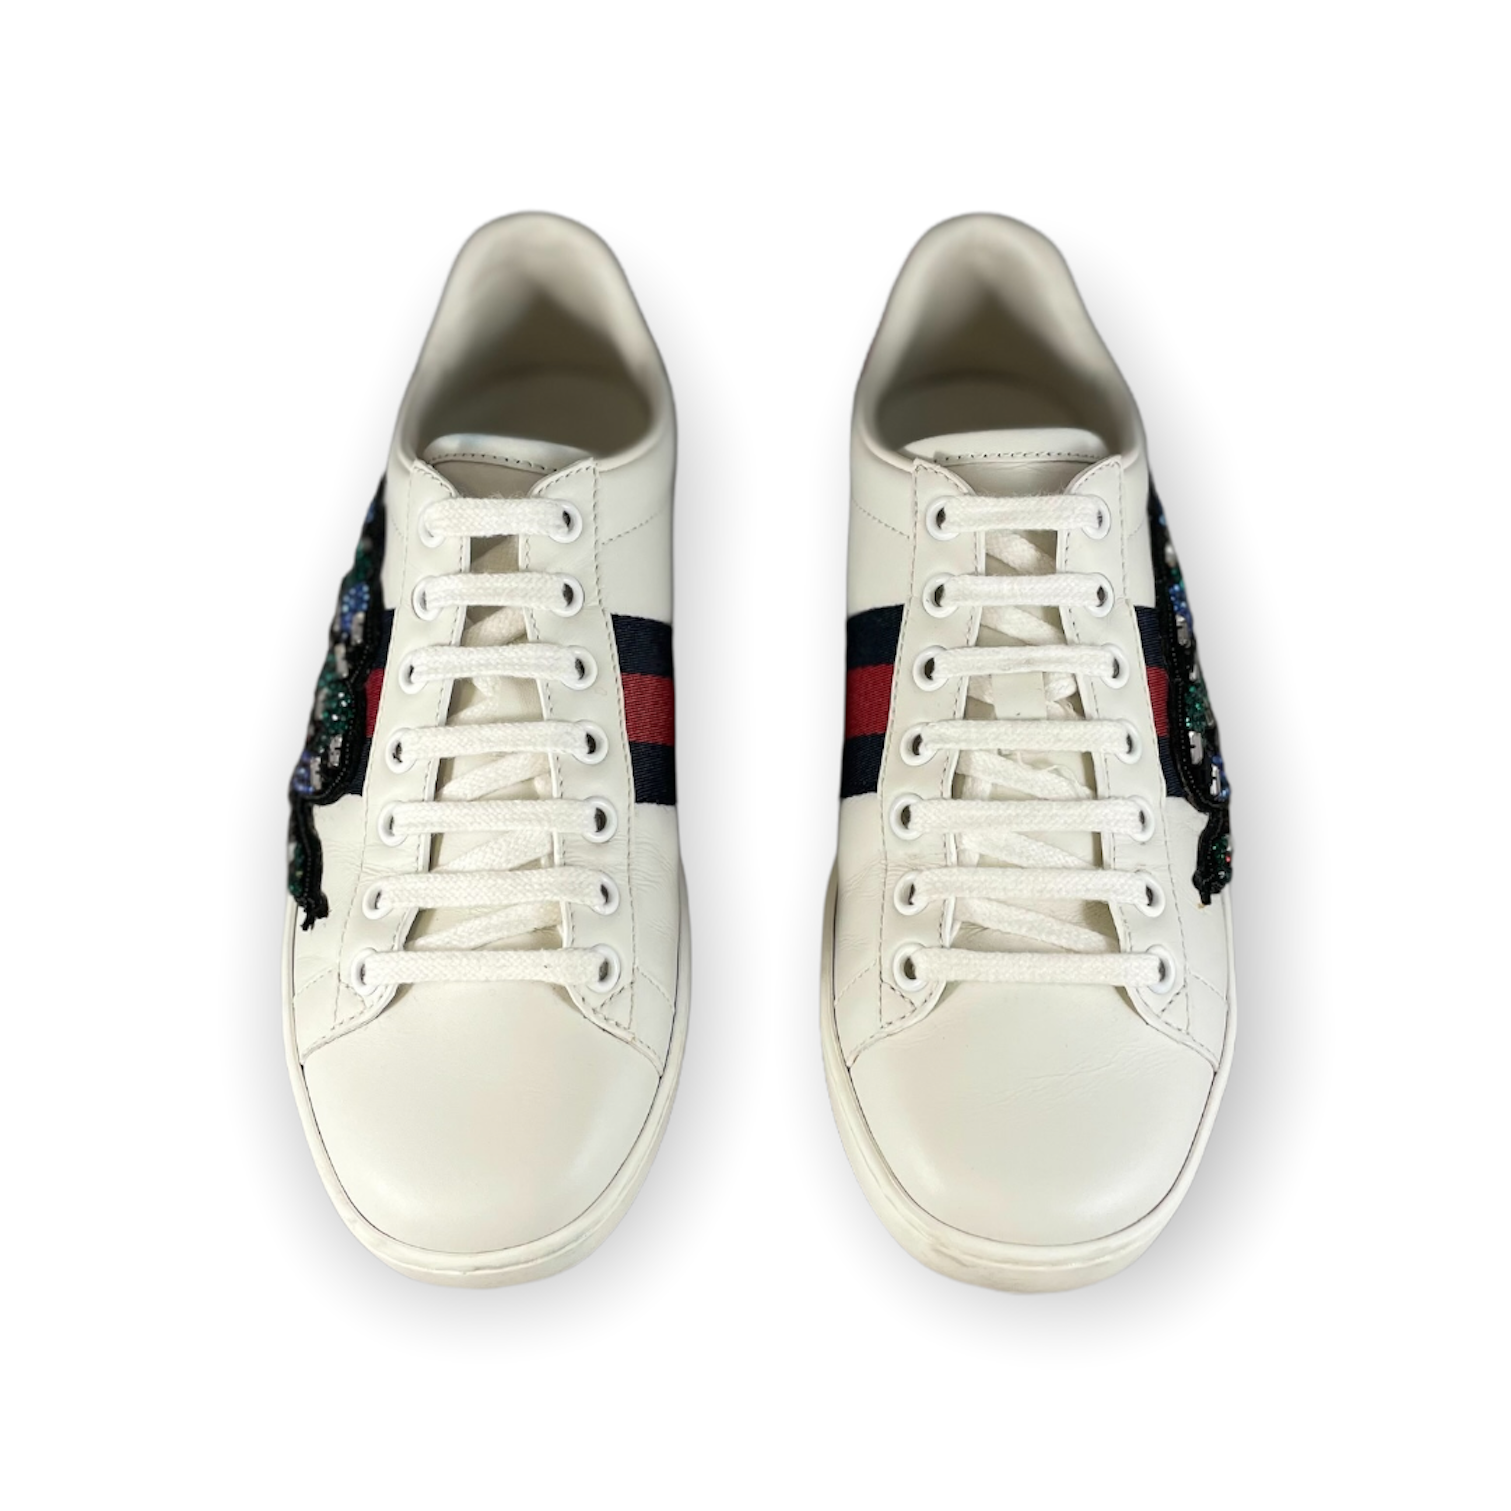 Neerduwen Zuiver Rafflesia Arnoldi GUCCI Ace Snake Sneakers in White - More Than You Can Imagine